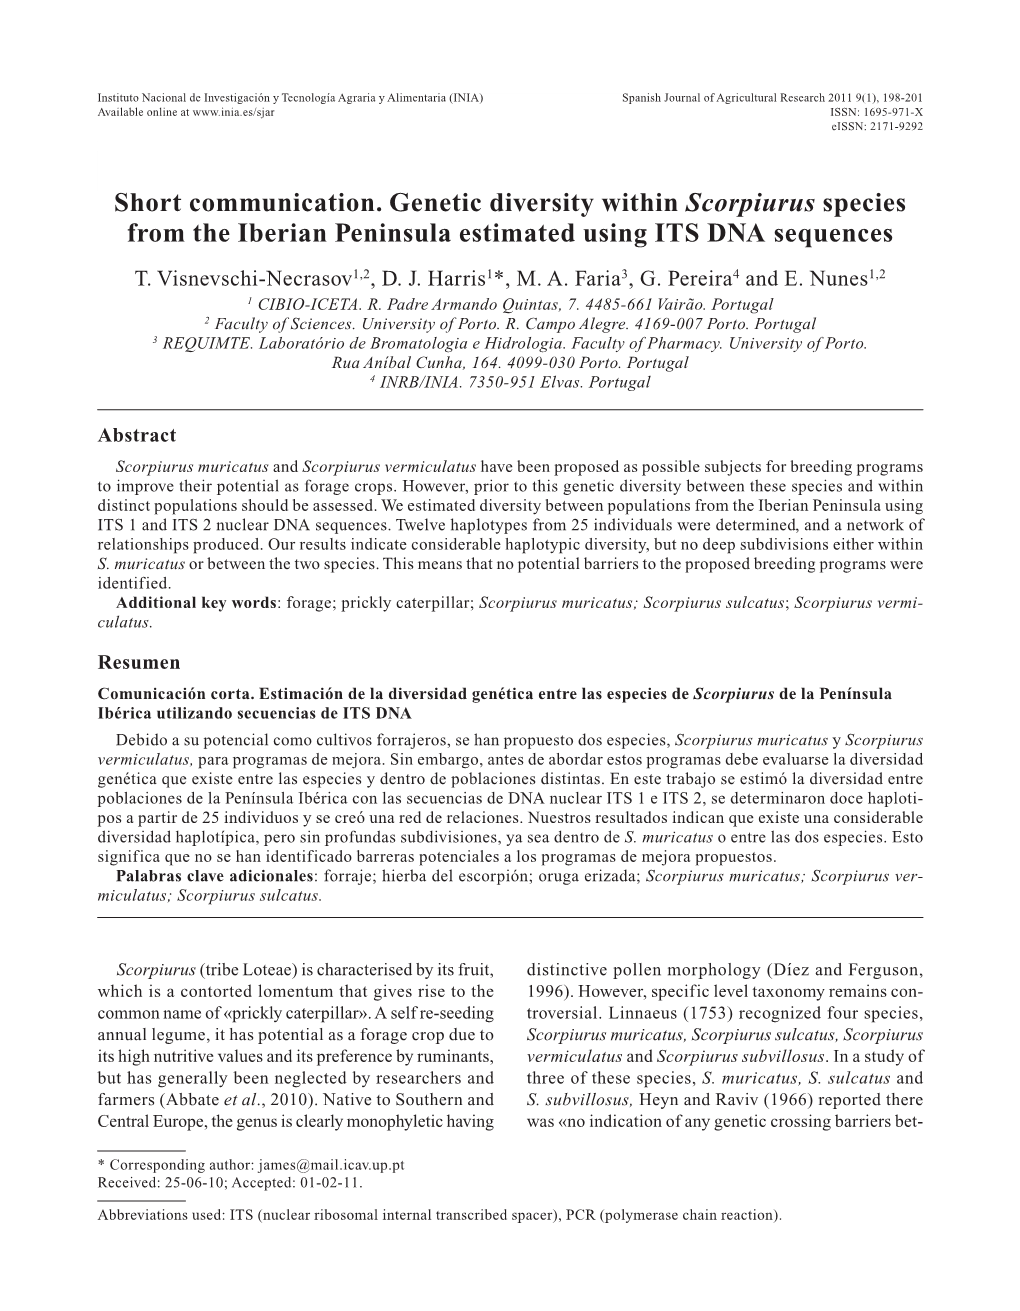 Short Communication. Genetic Diversity Within Scorpiurus Species from the Iberian Peninsula Estimated Using ITS DNA Sequences T